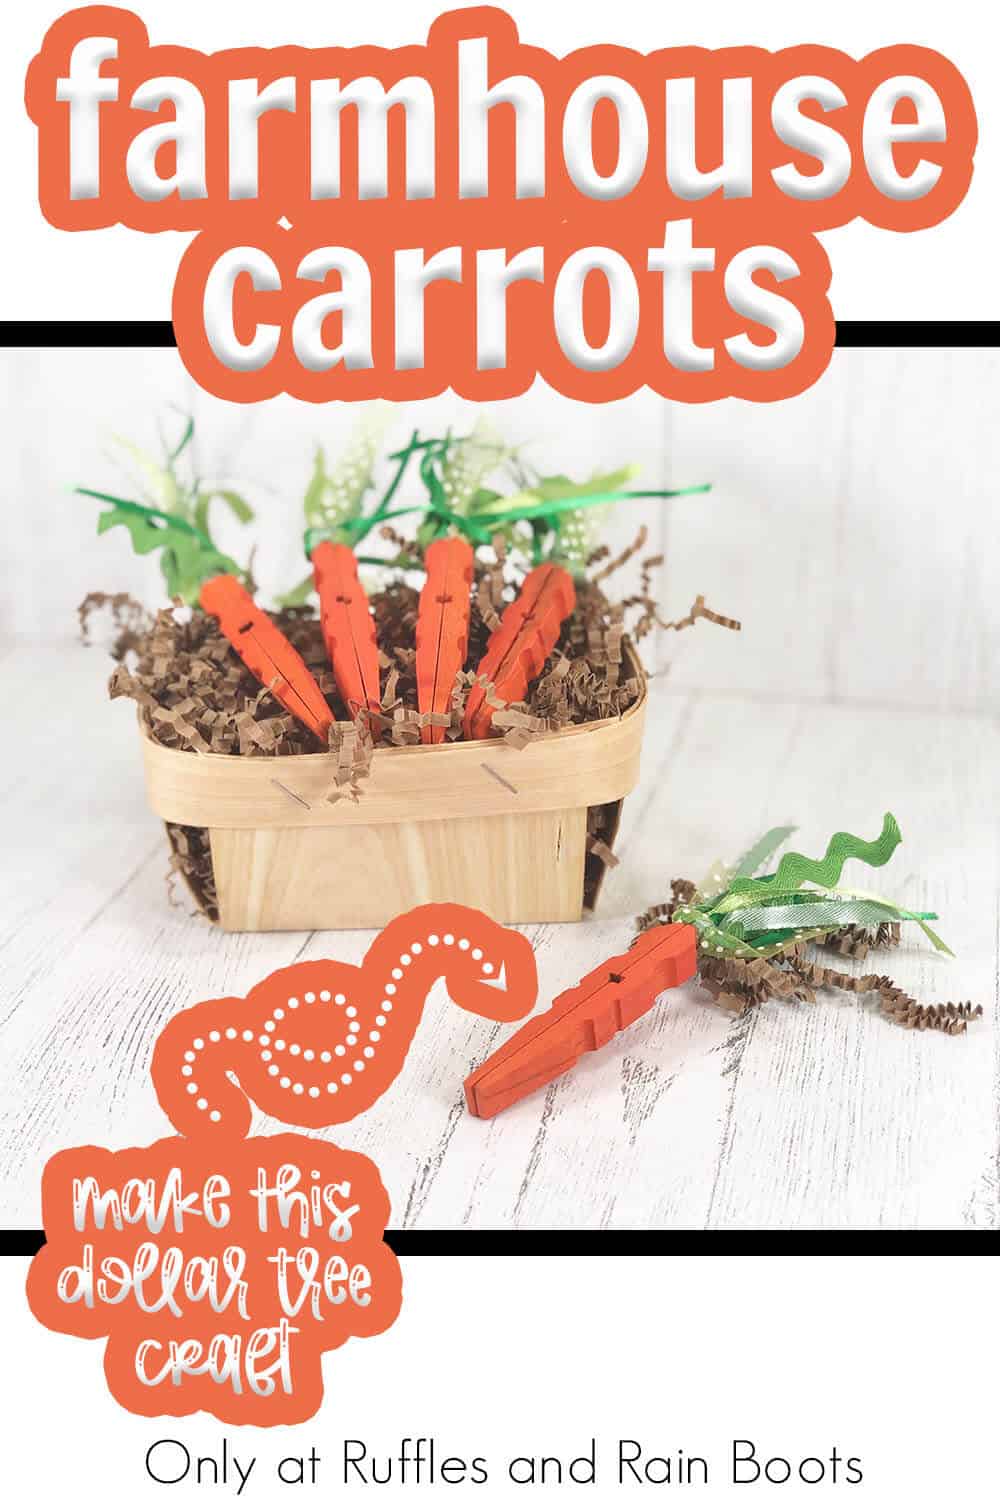 farmhouse carrots from clothespins with text which reads farmhouse carrots make this dollar tree craft